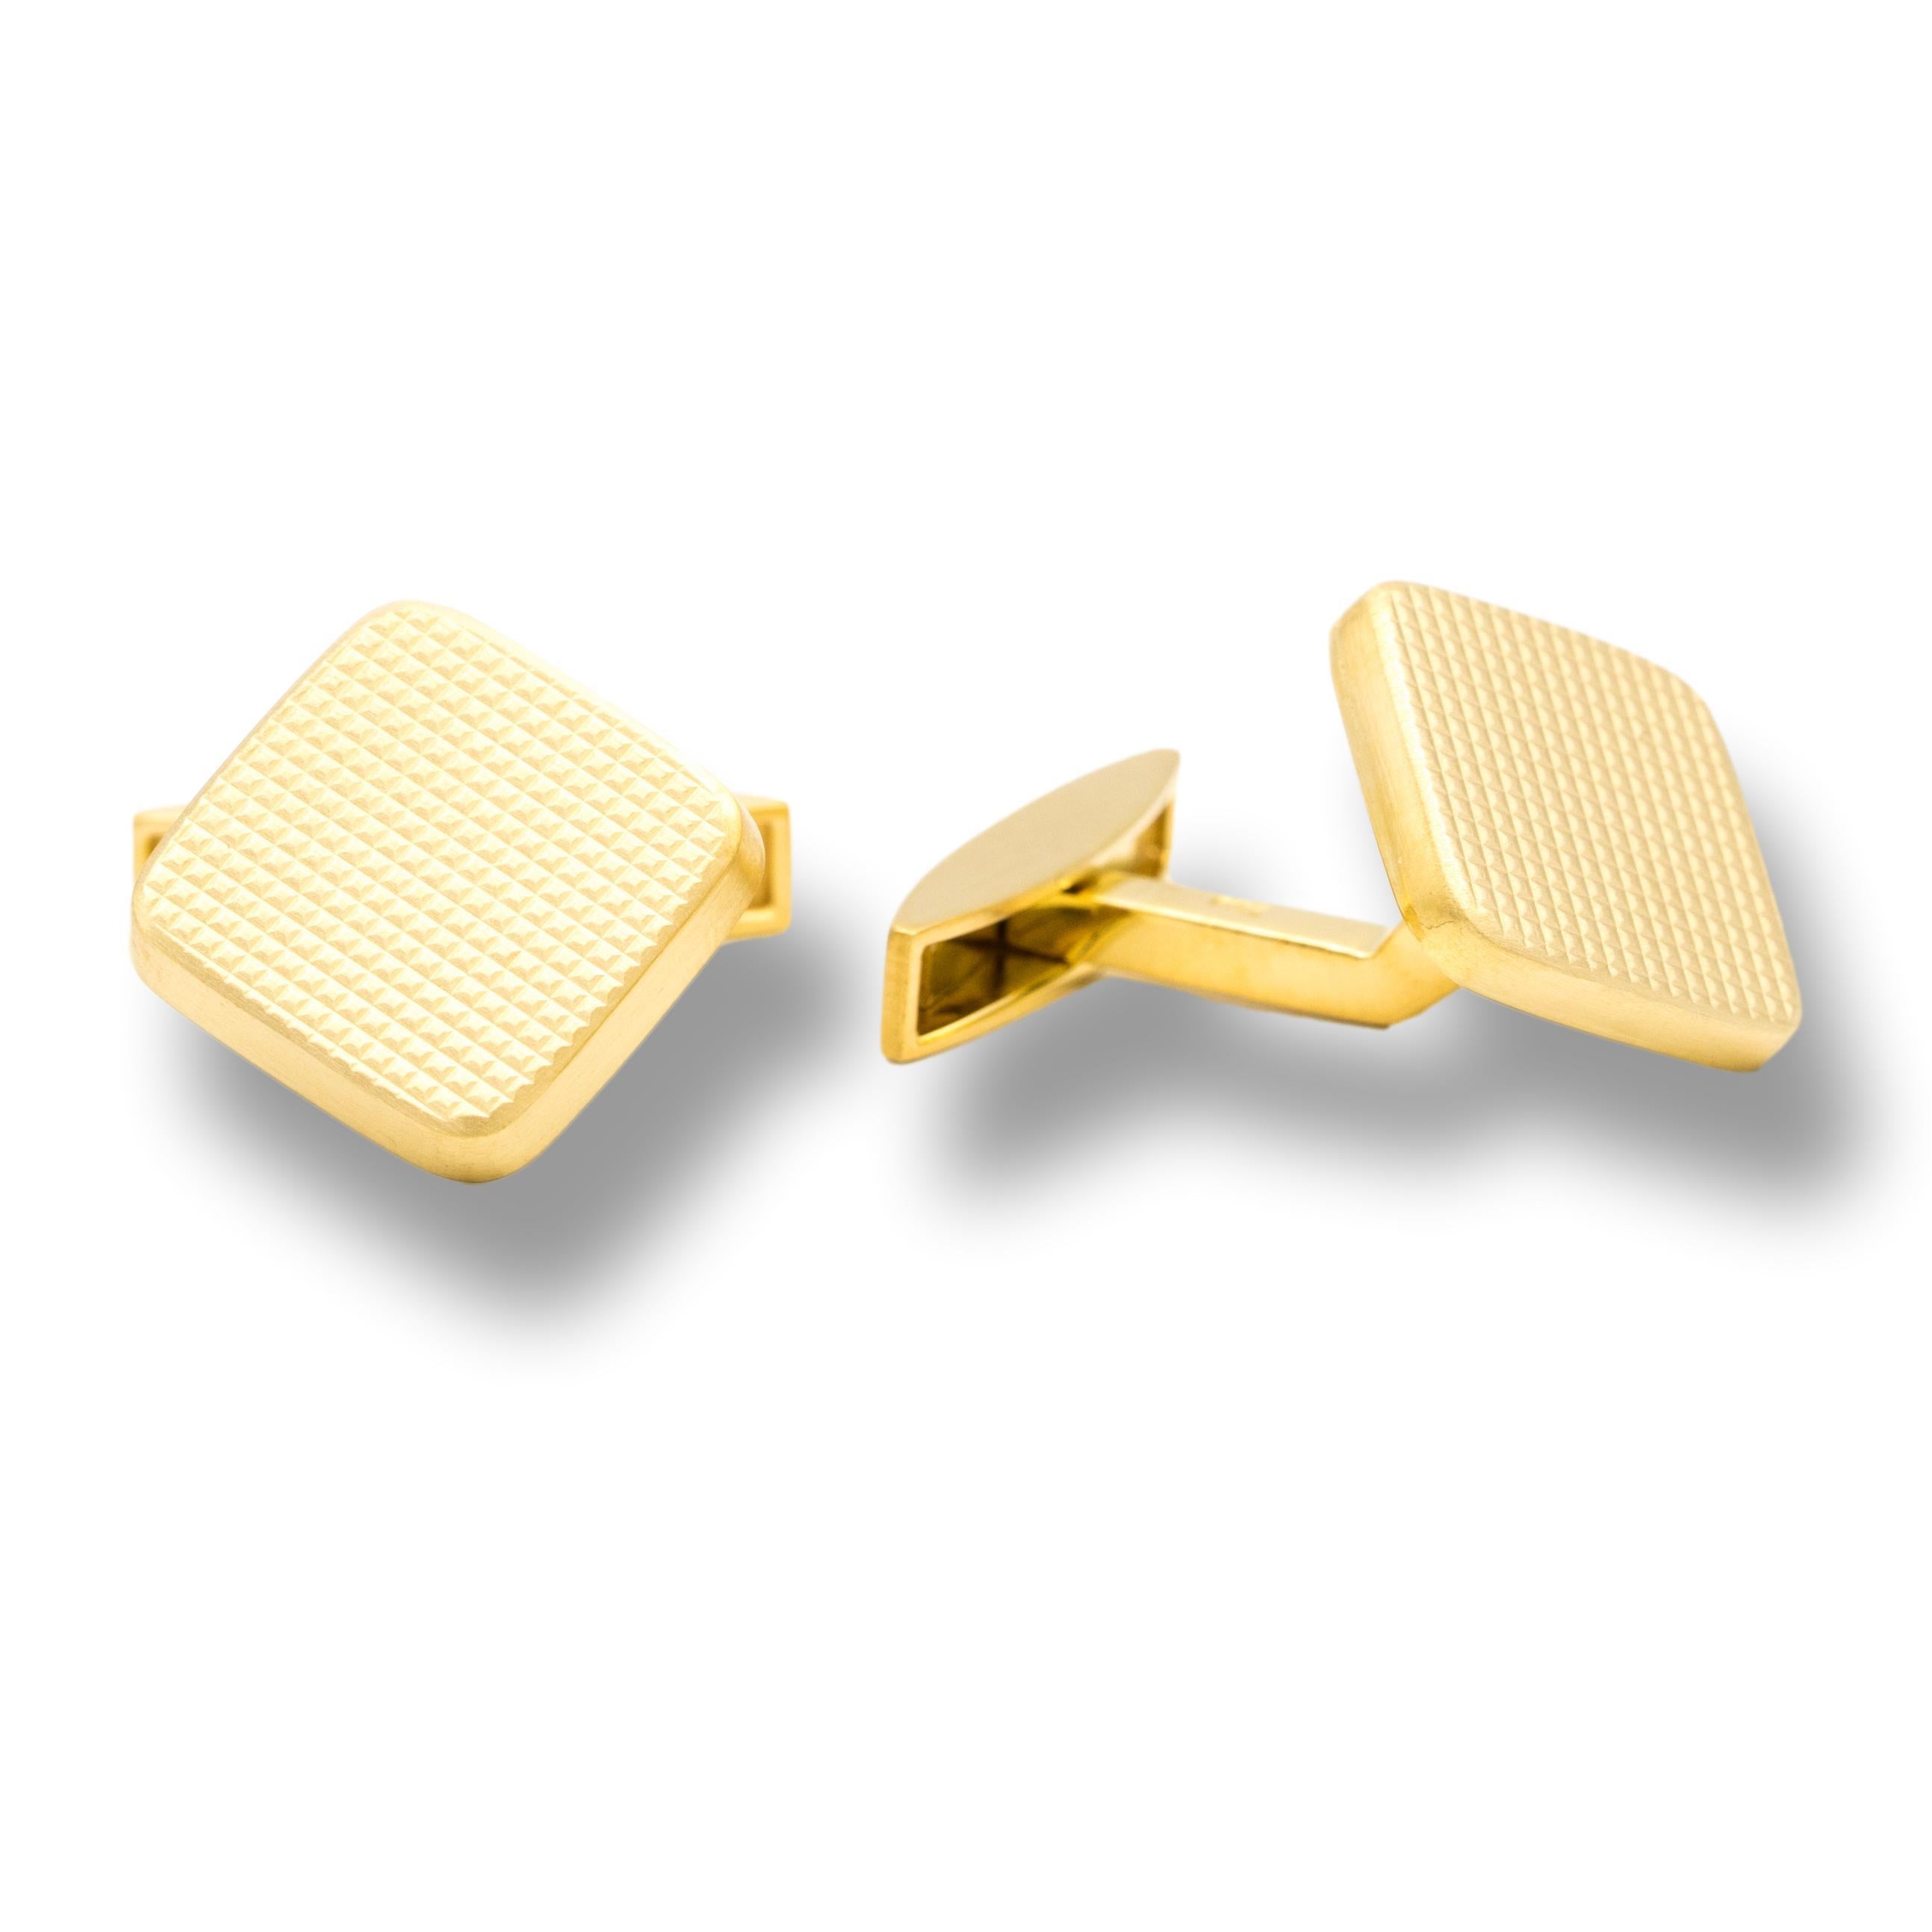 18K Yellow Gold Vintage Cuff Links with Waffle Design
Pair of waffle design cufflinks finely crafted in 18 karat yellow gold in excellent , like new condition  , recently re-polished and cleaned.  Combination of Satin and High polish finish create